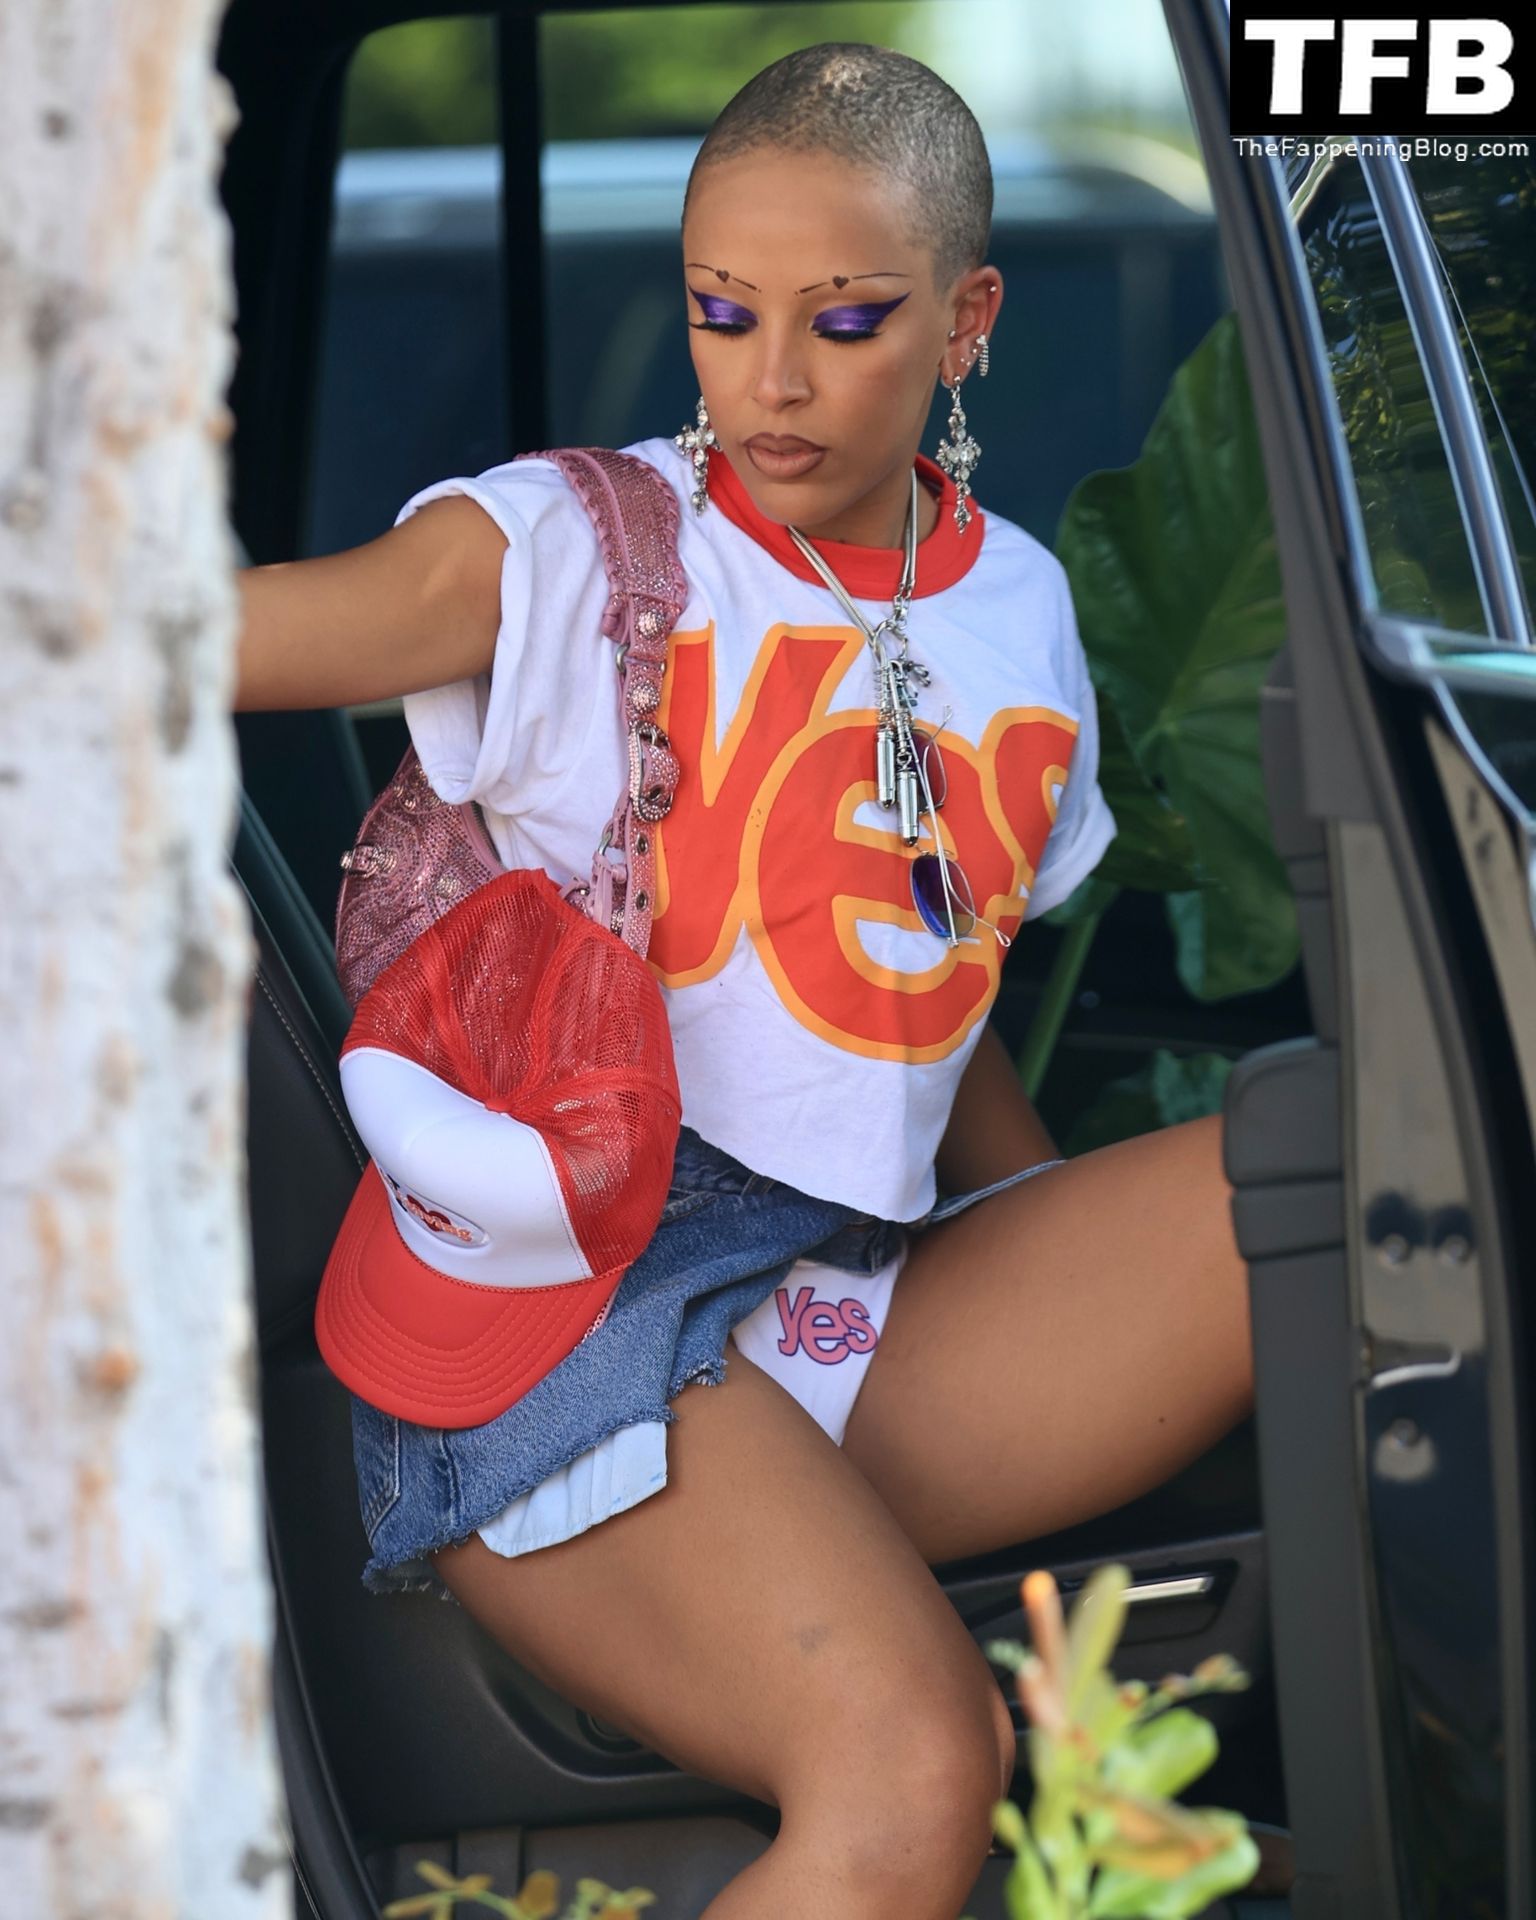 Doja Cat Sexy The Fappening Blog 2 - Doja Cat Puts on a Sexy Display While Spotted Shopping in Calabasas (7 Photos)